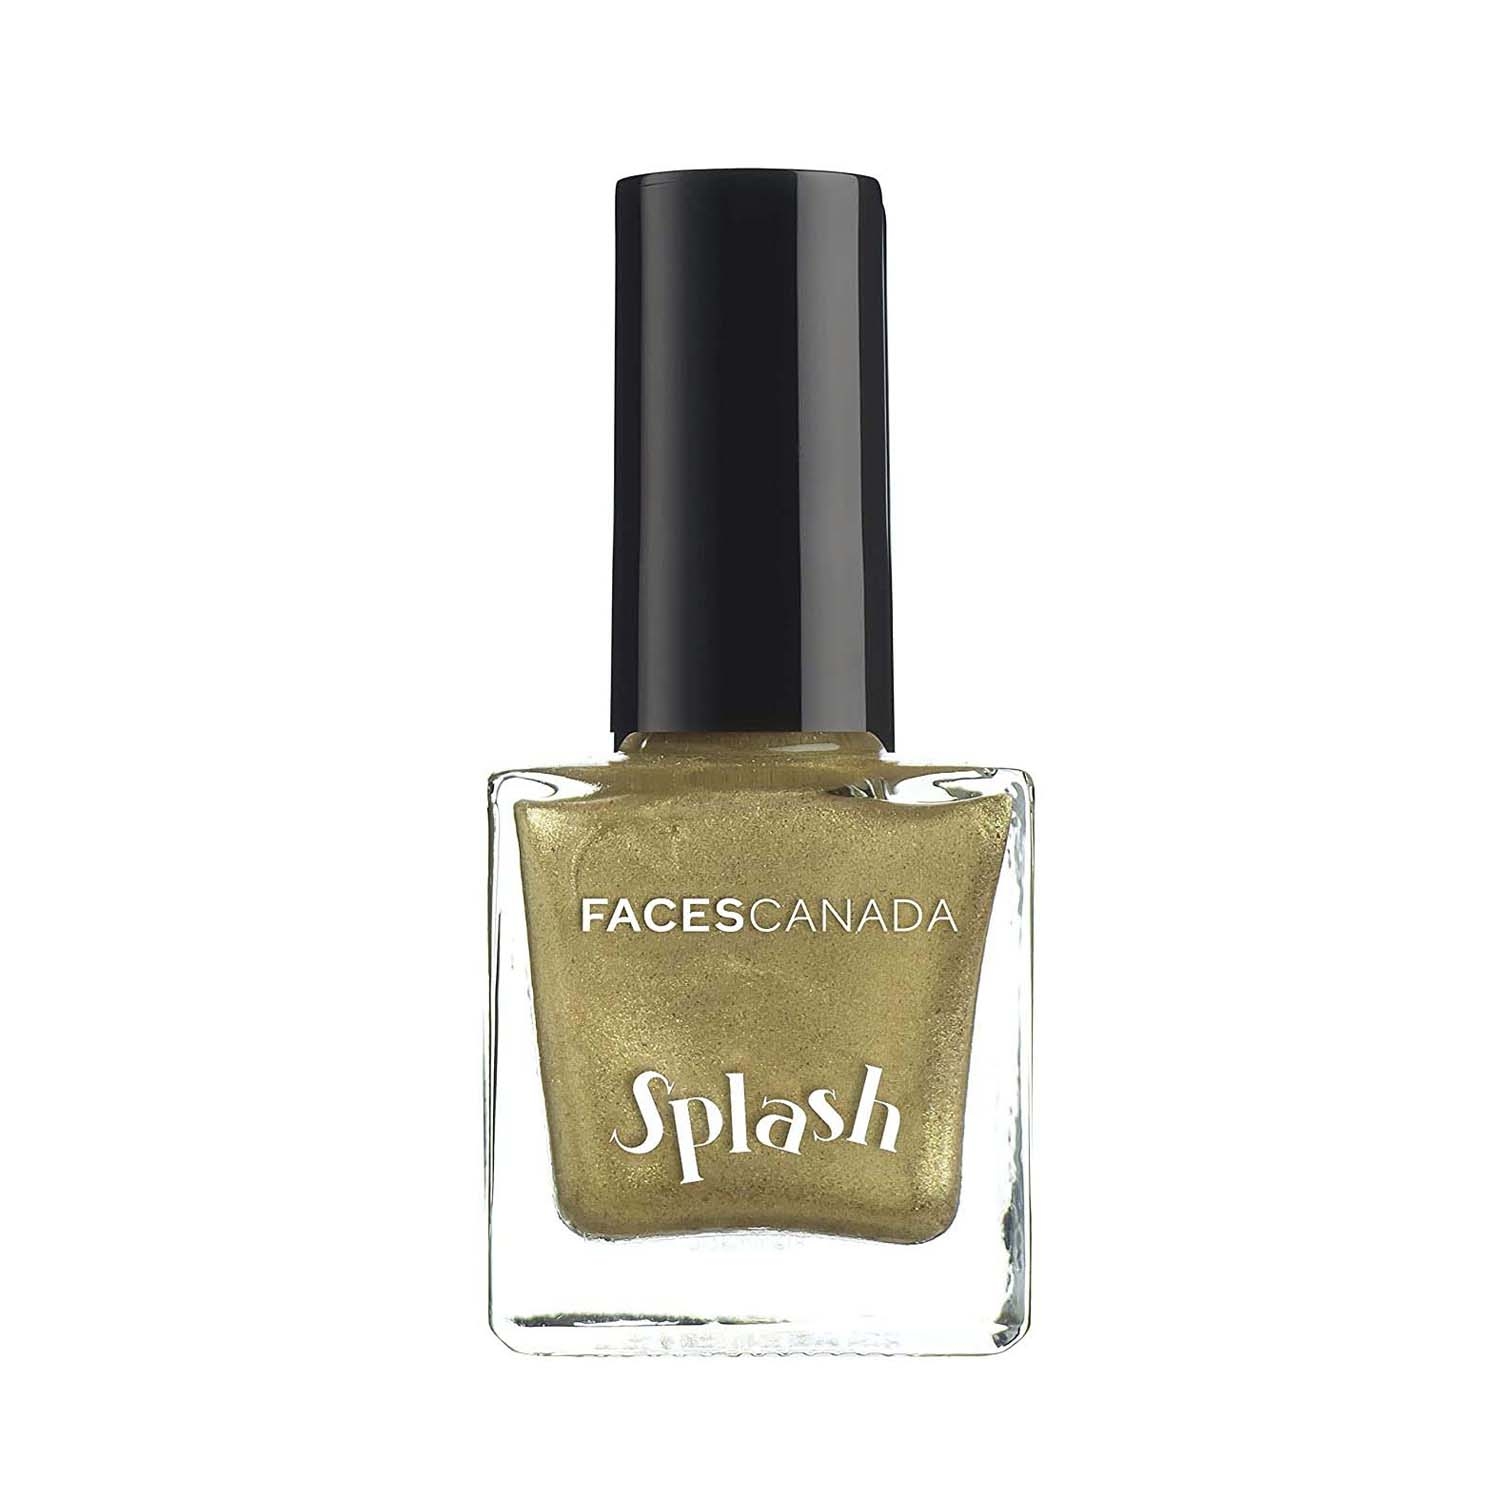 Faces Canada Hi Shine Ultime Pro Nail Polishes | Review & Swatches